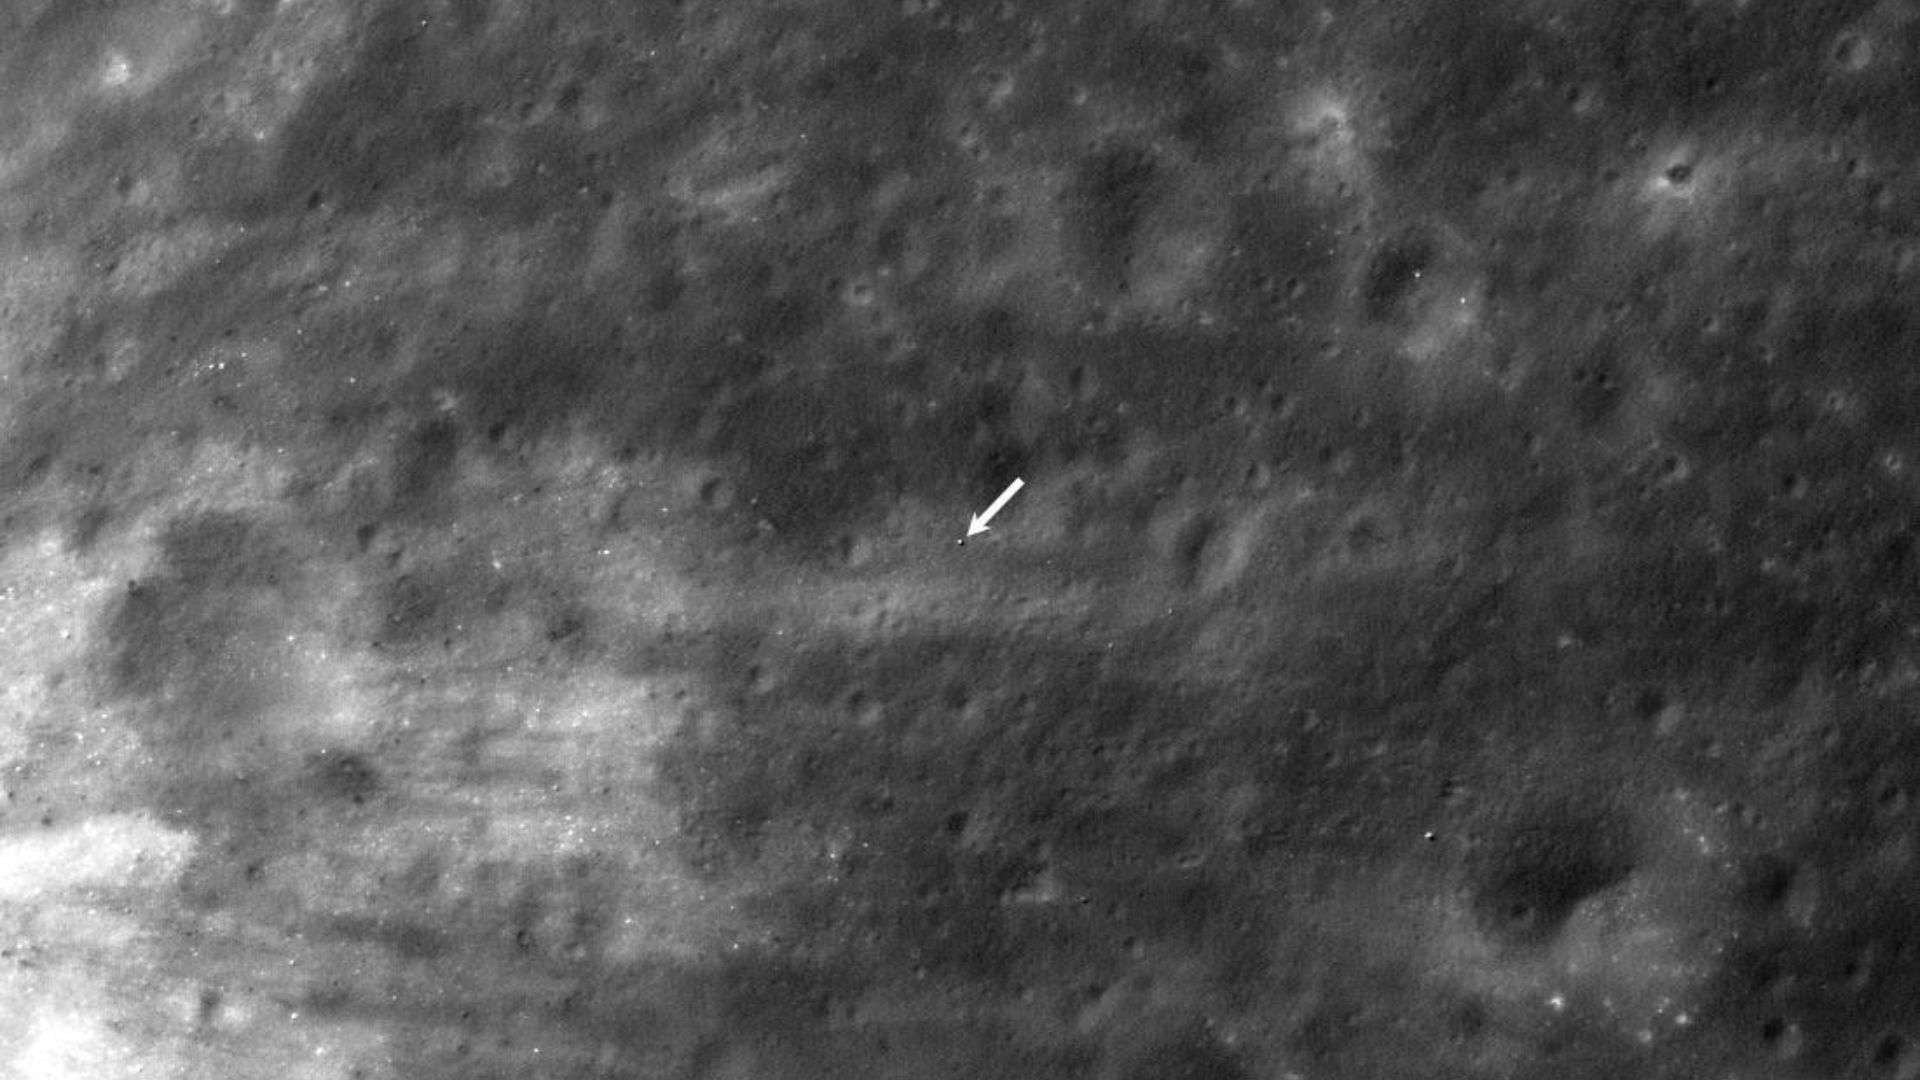 NASA's LRO spacecraft spotted Japan's SLIM spacecraft on the lunar surface